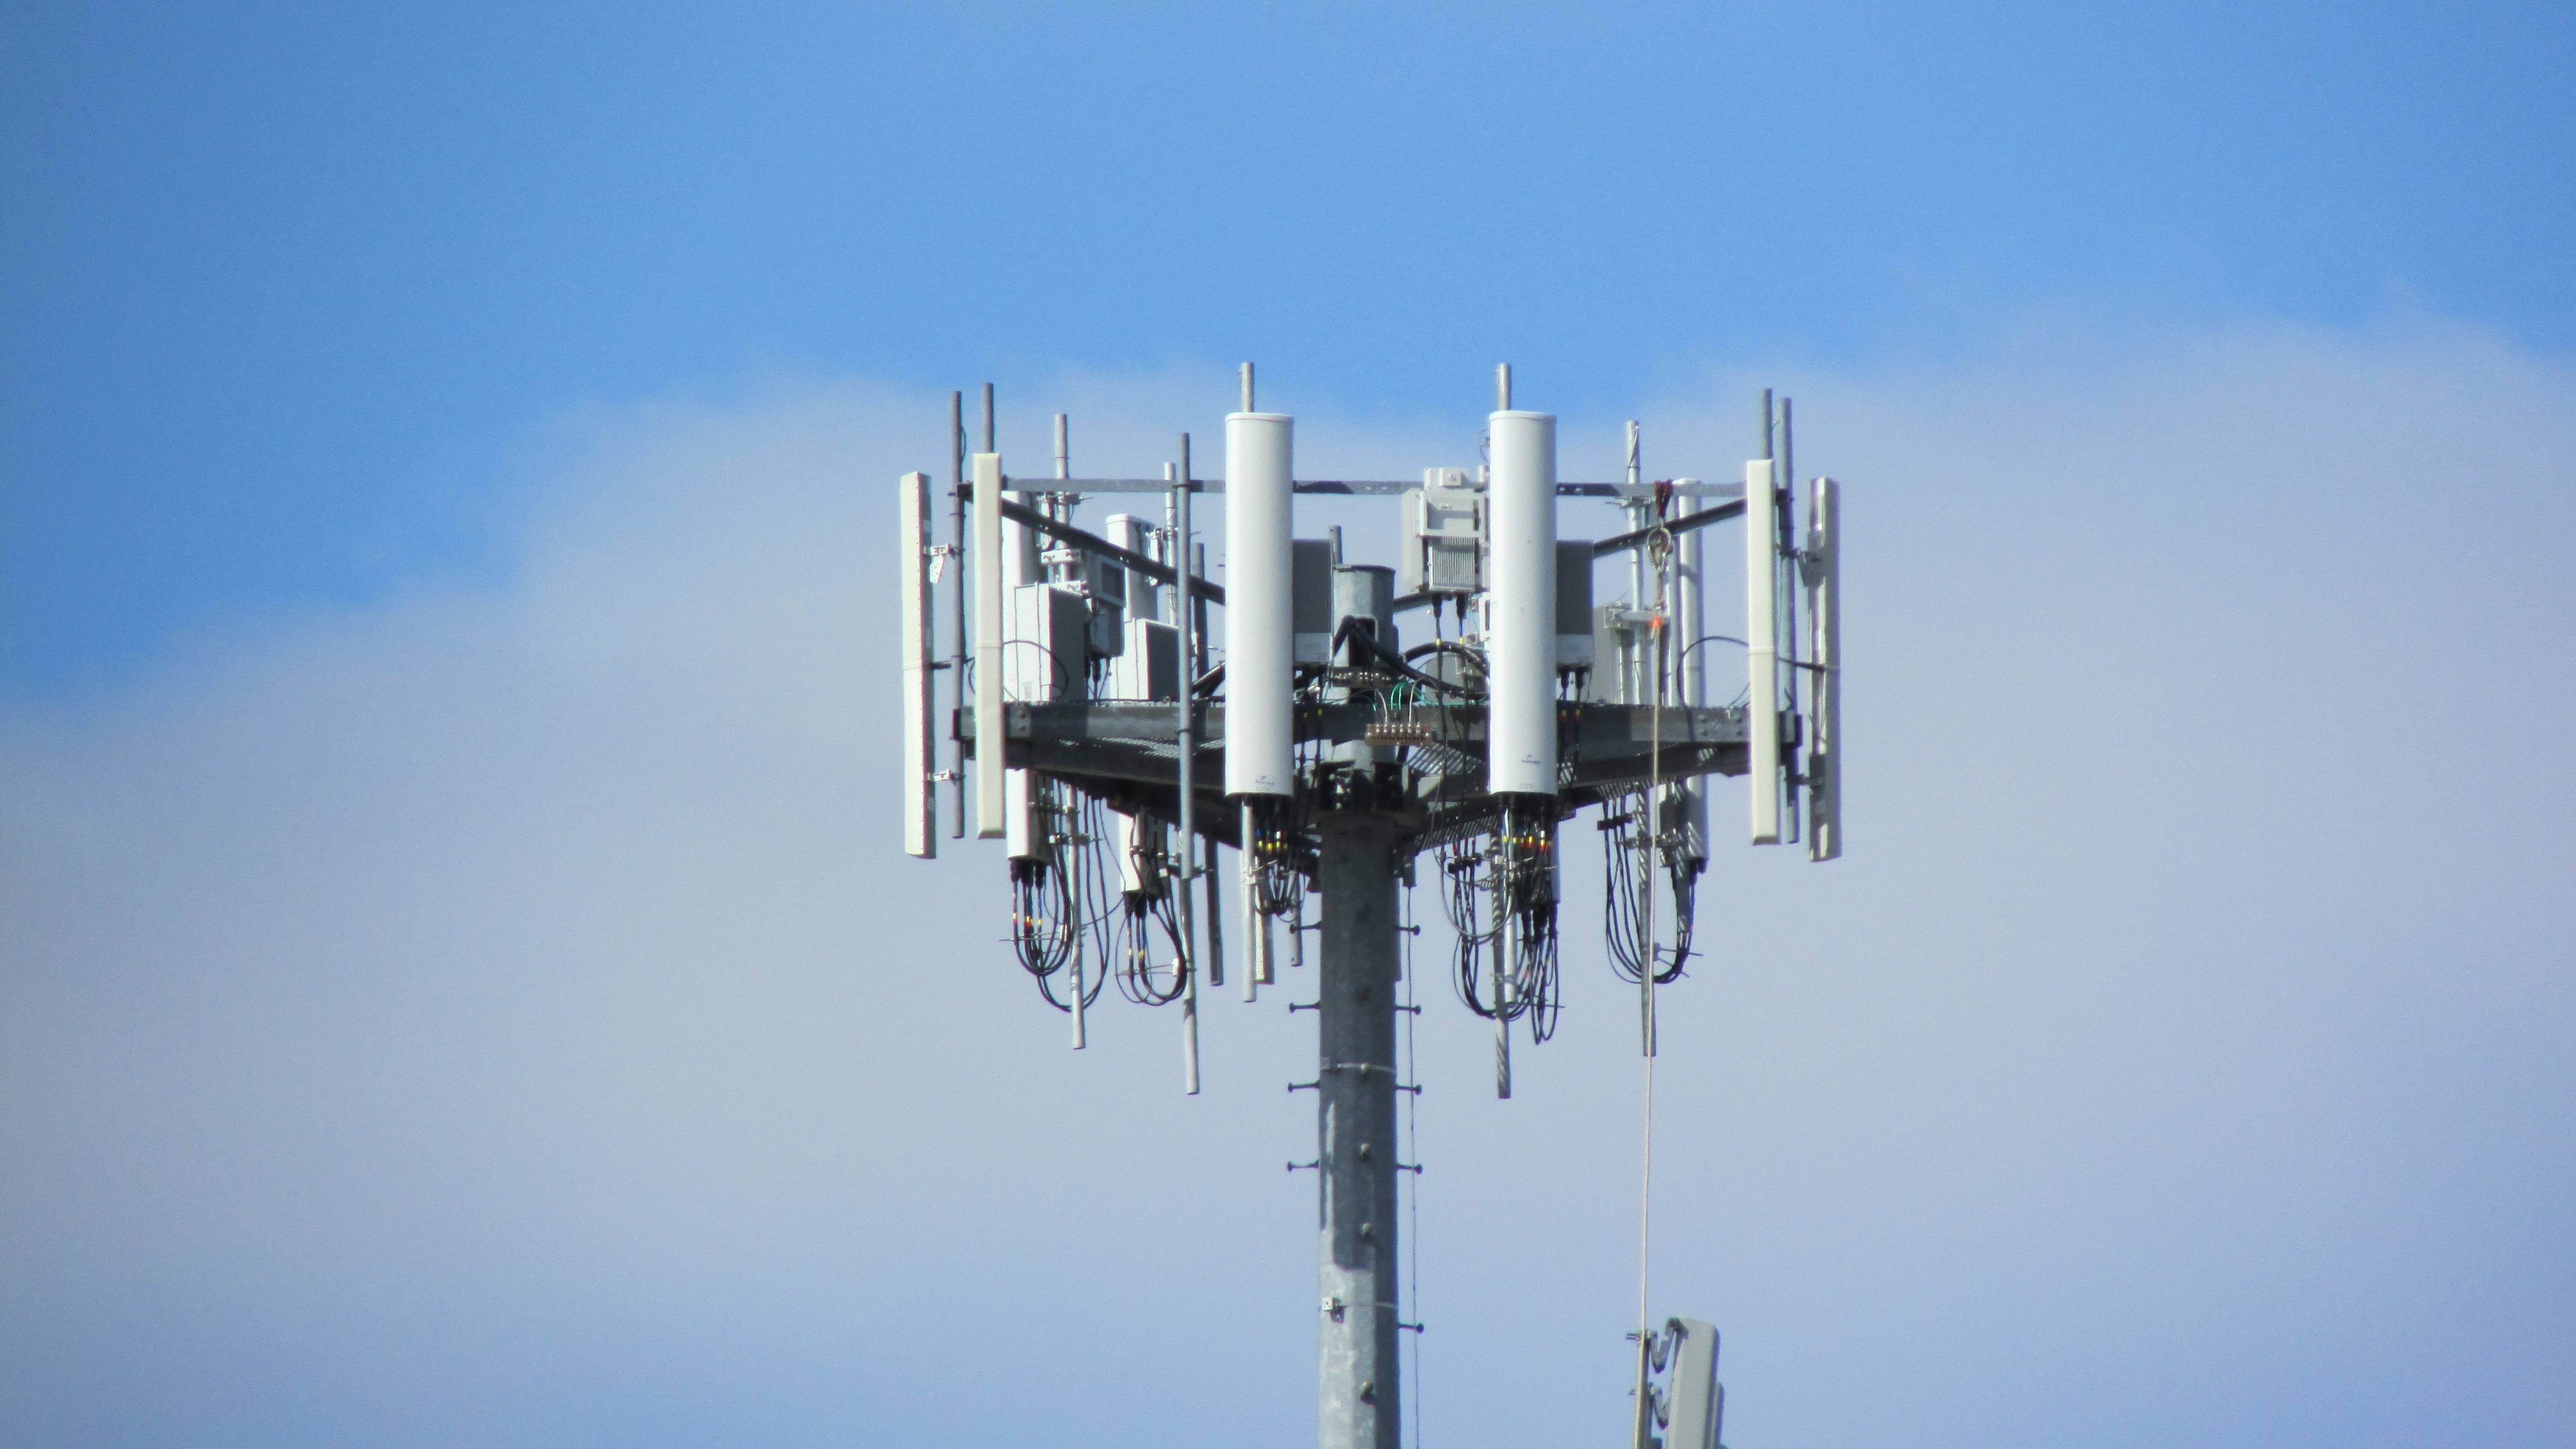 How to Spot Sprint Antennas and RRUs (Samsung) - Equipment Spotting ...